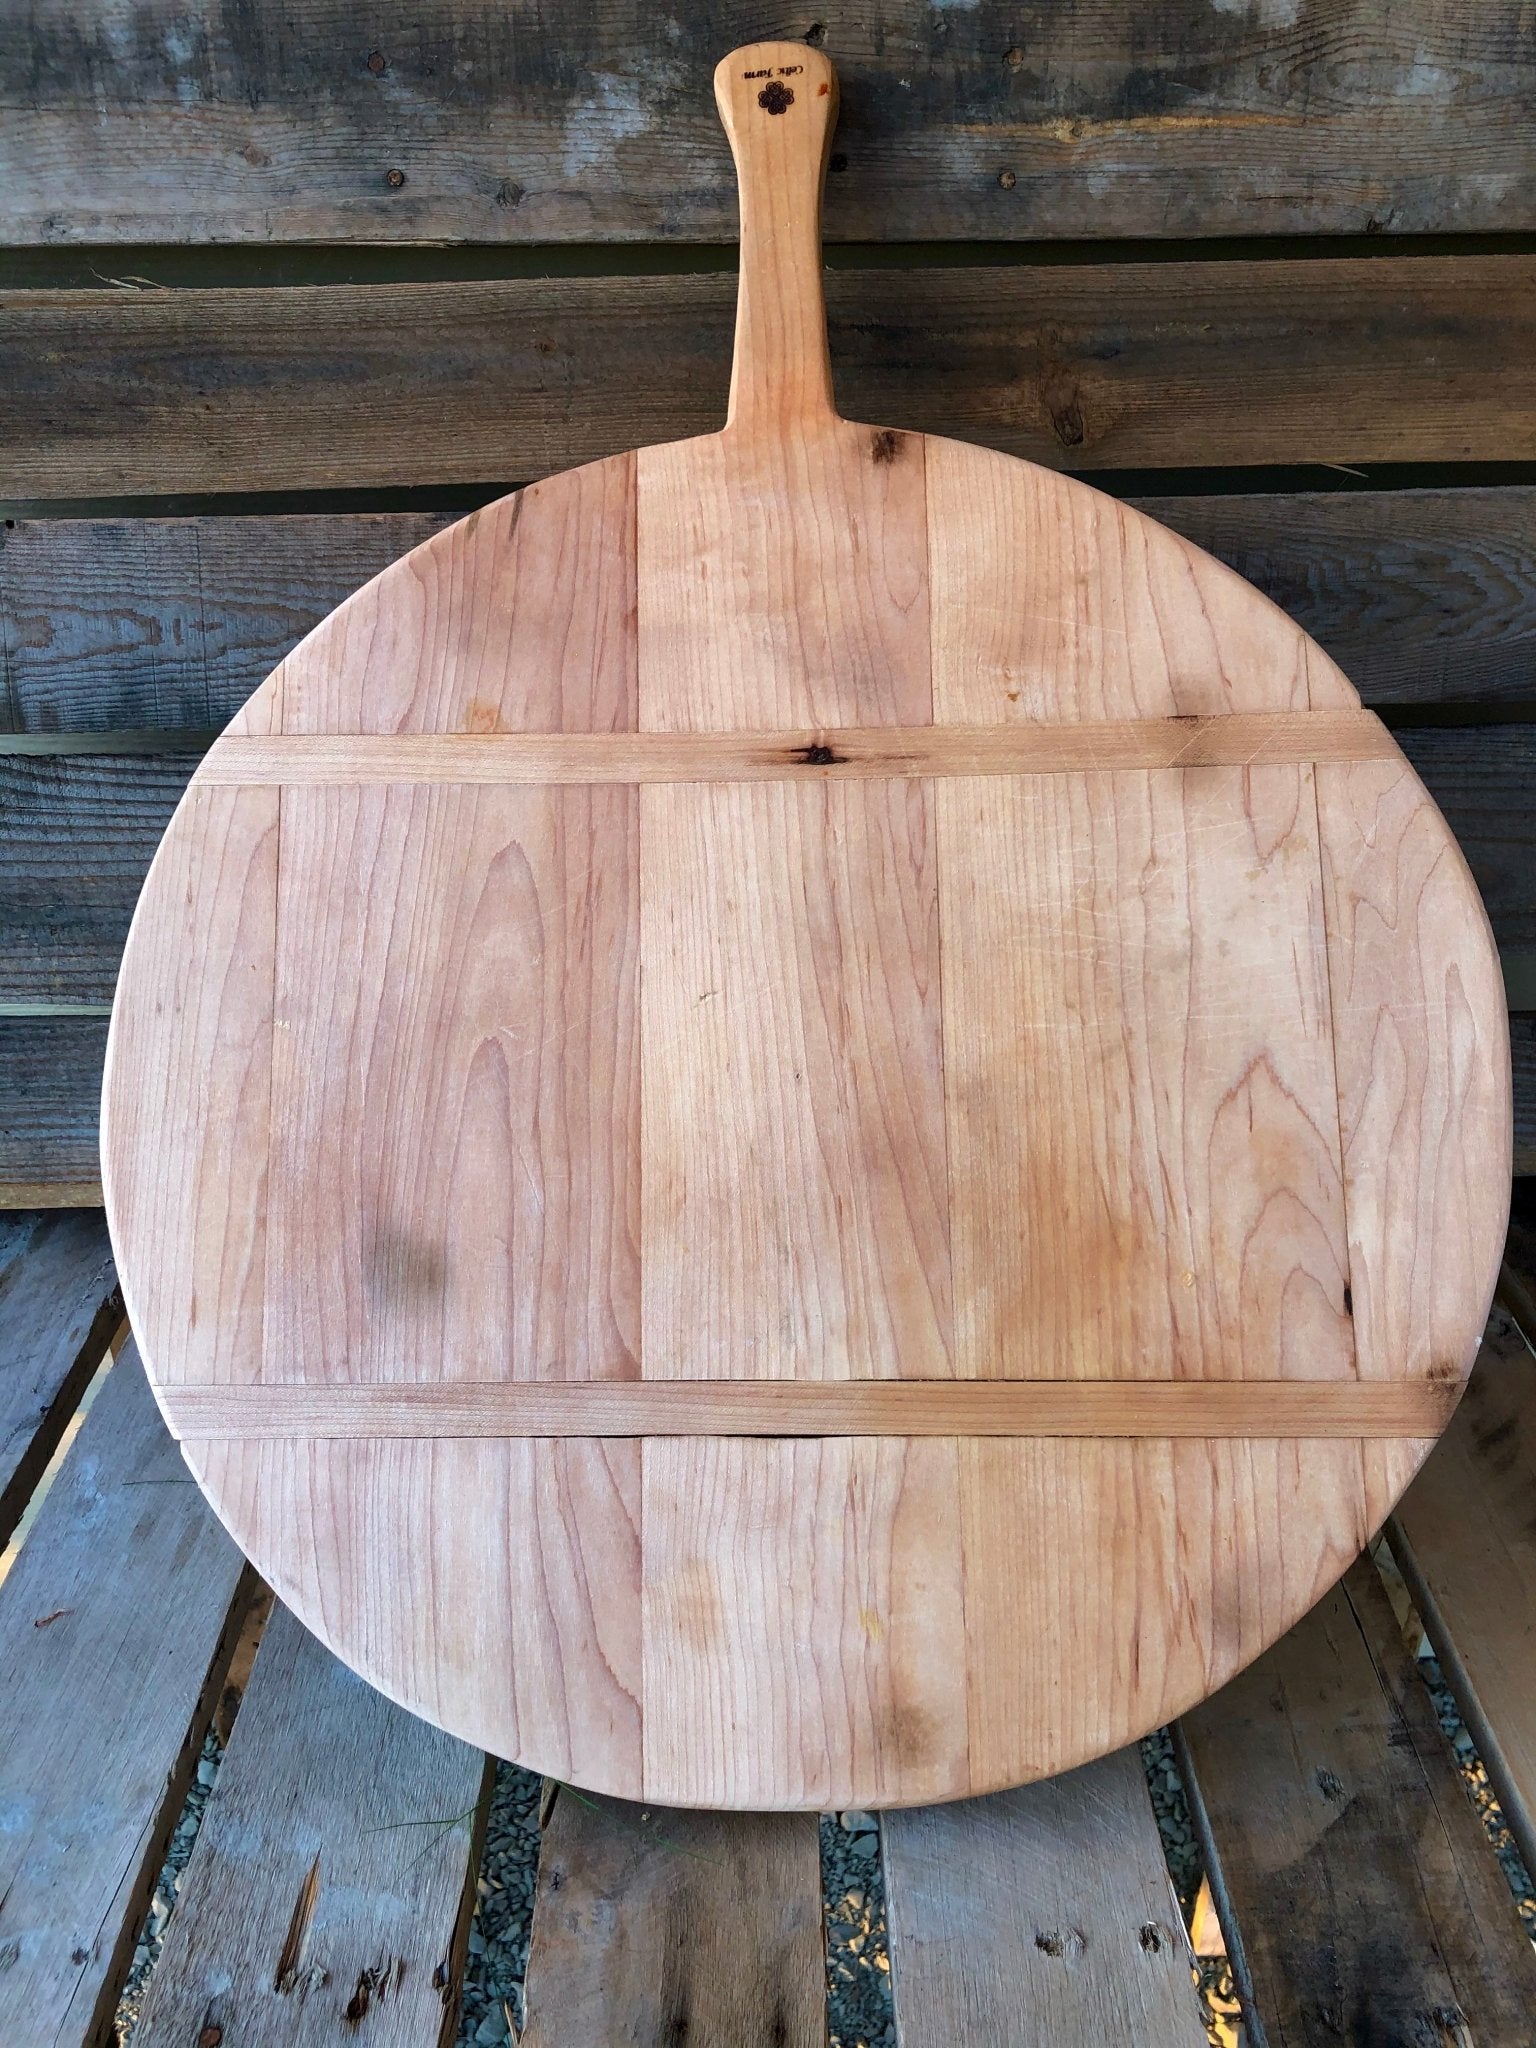 https://shop.thecelticfarm.com/cdn/shop/products/best-charcuterie-board-vintage-style-round-maple-french-breadboard-841865_1536x.jpg?v=1682337078